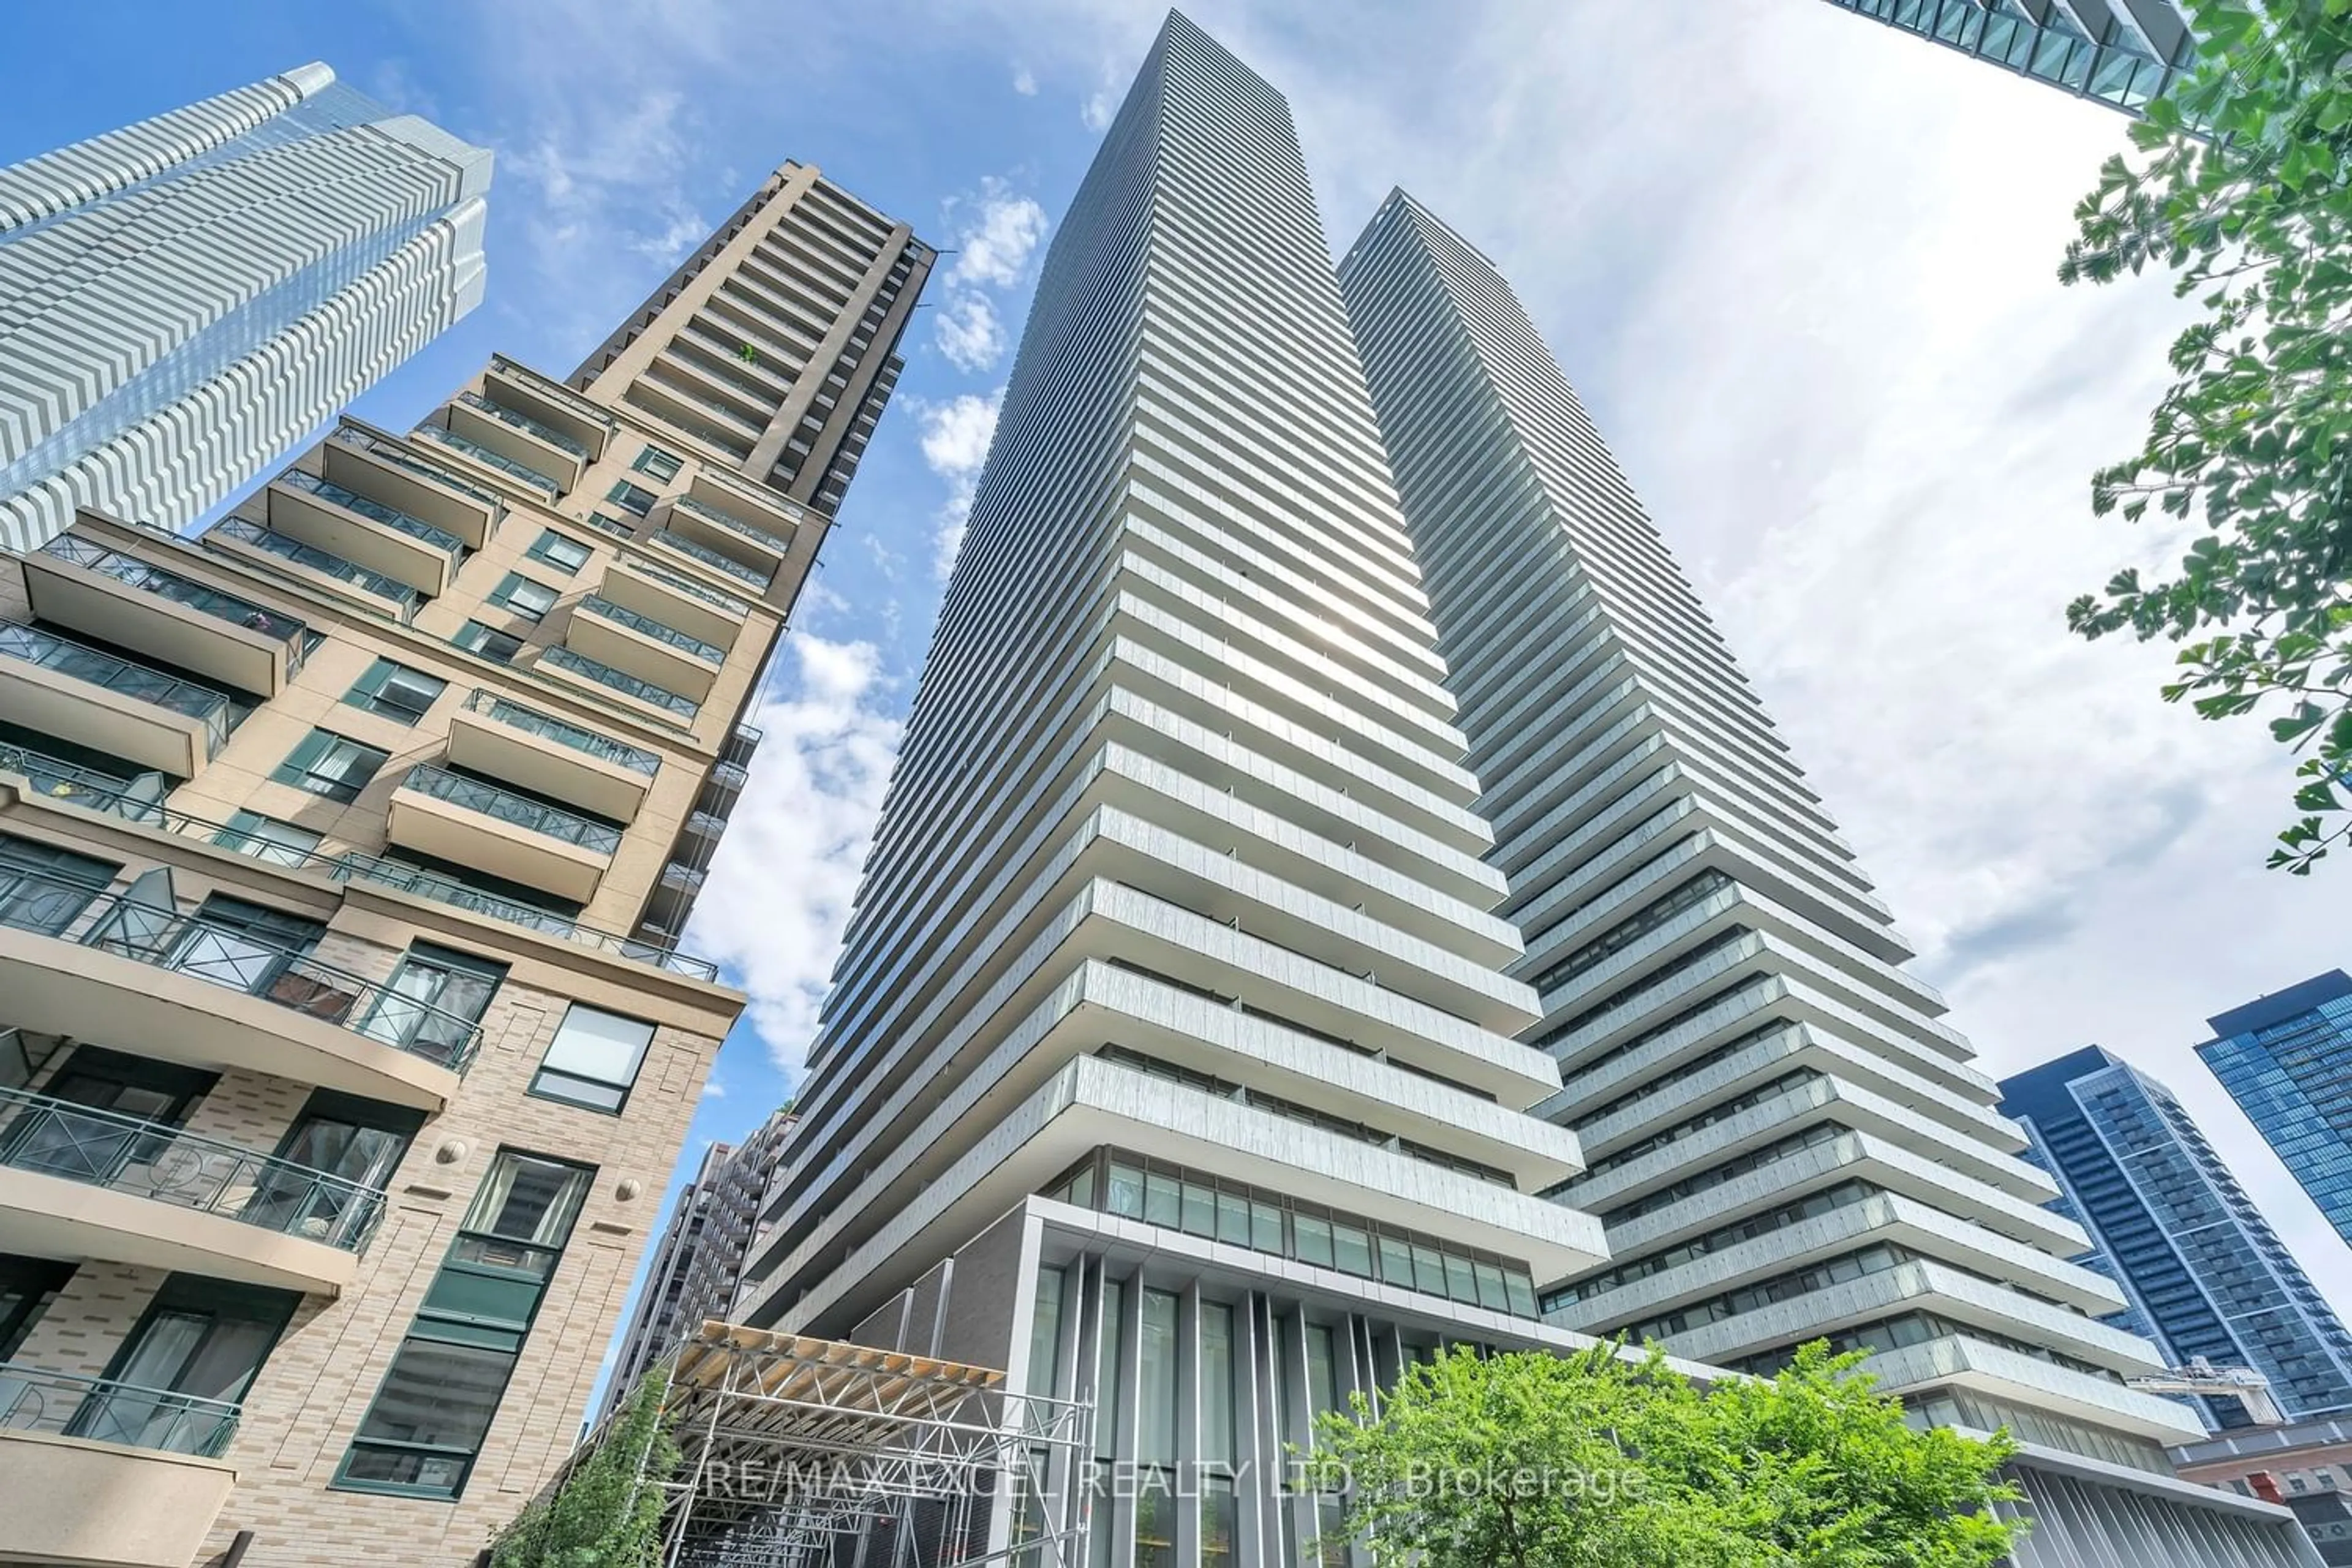 A pic from exterior of the house or condo for 42 Charles St #3706, Toronto Ontario M4Y 0B7